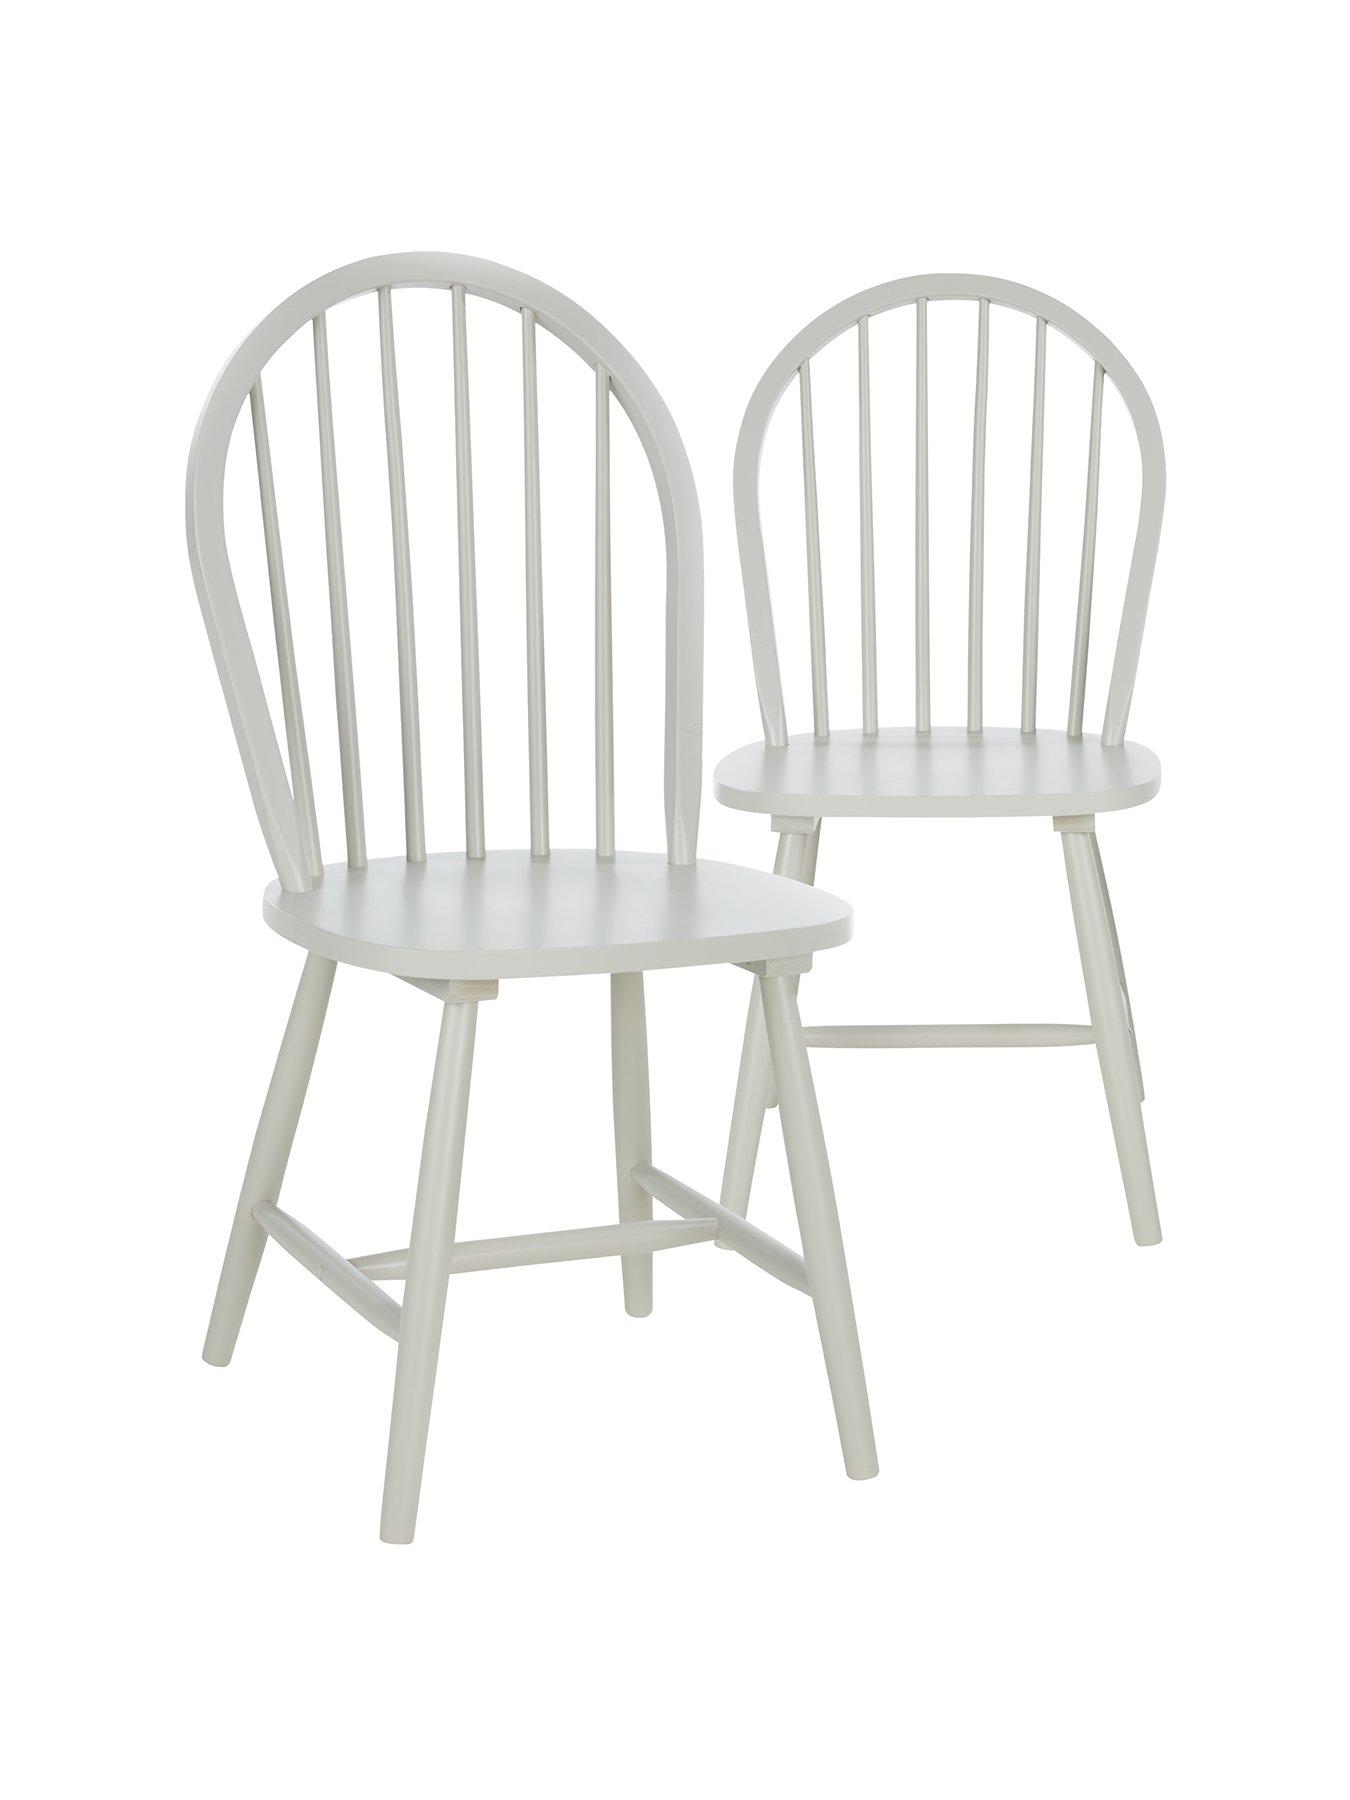 Pair of Daisy Dining Chairs | littlewoods.com